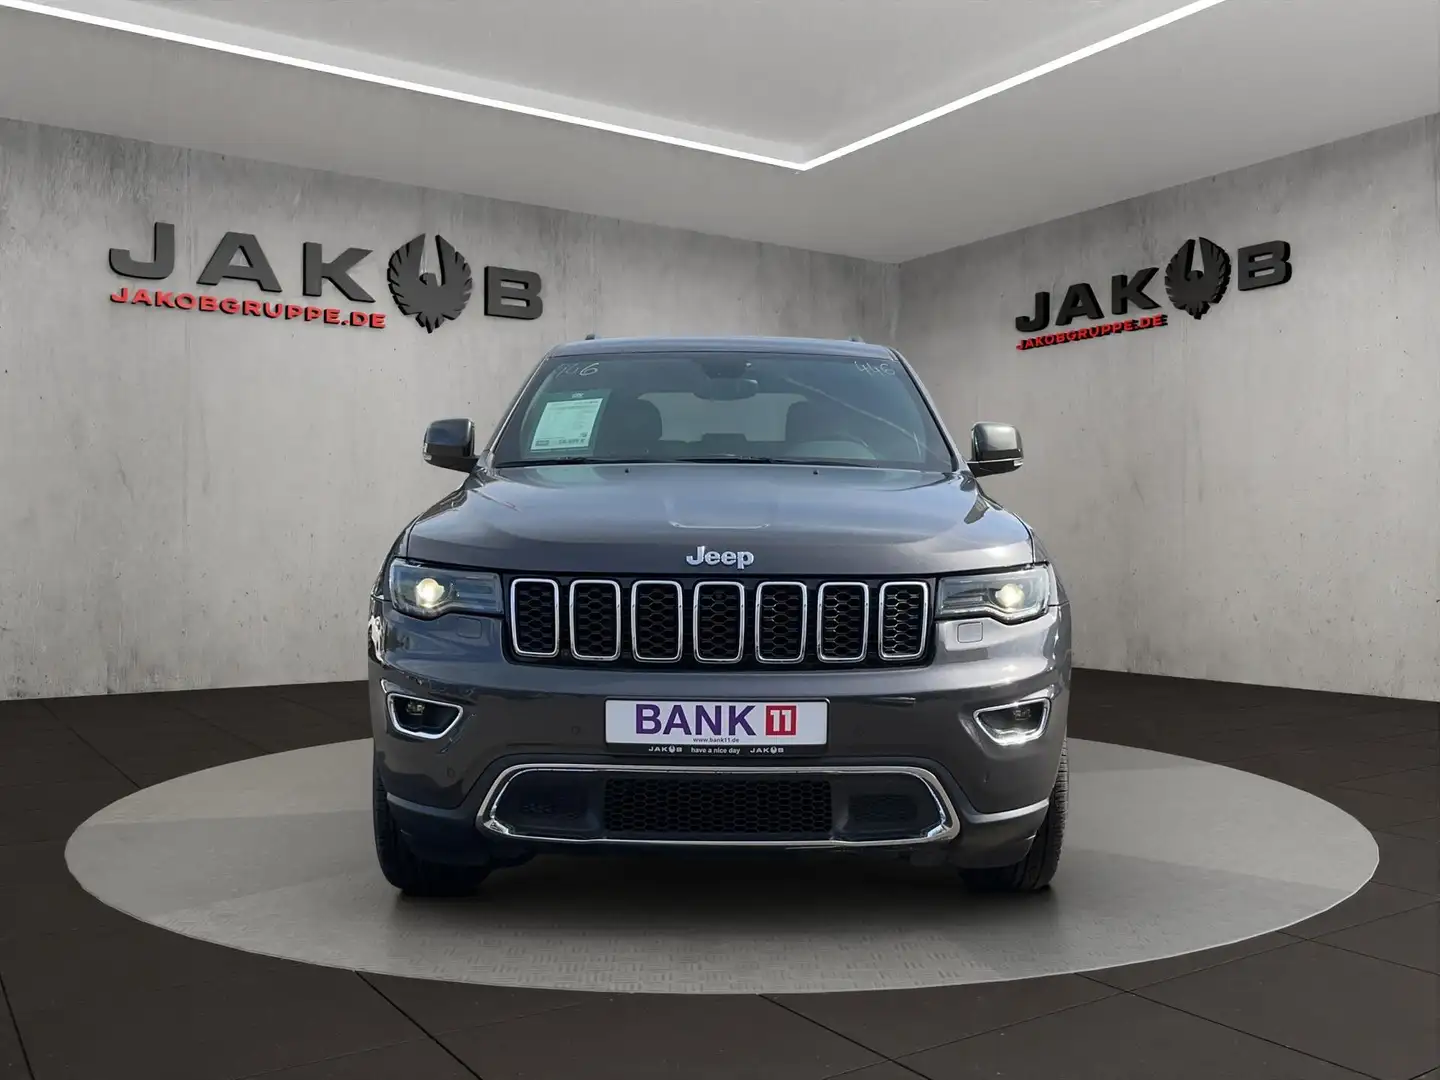 Jeep Grand Cherokee 3.0 CRD Limited SHZ+Leder+Xenon 184 kW (250 PS)... Grey - 2